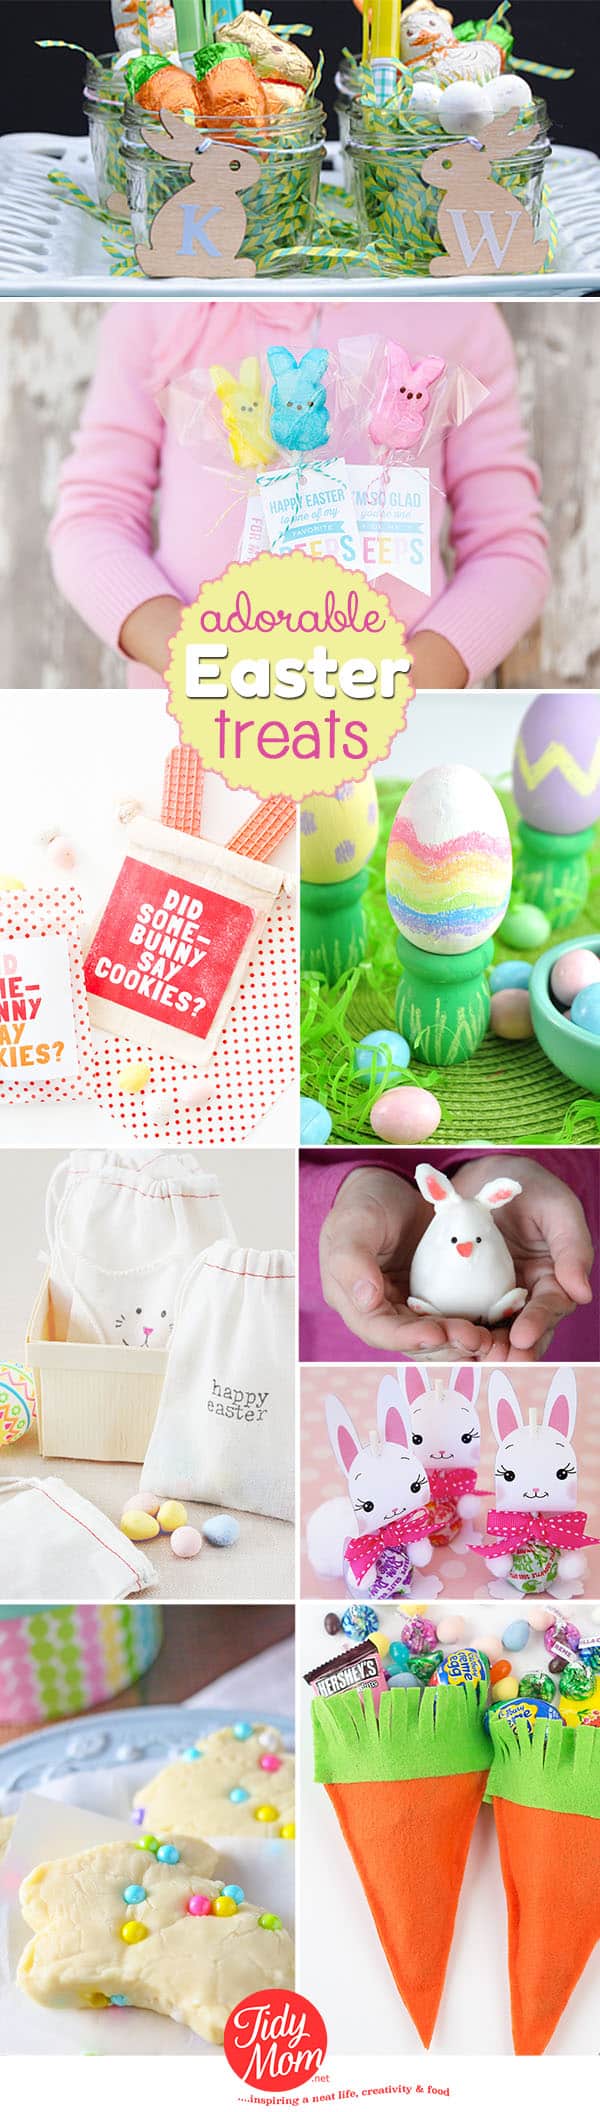 Adorable Easter treats and gift ideas to make at TidyMom.net